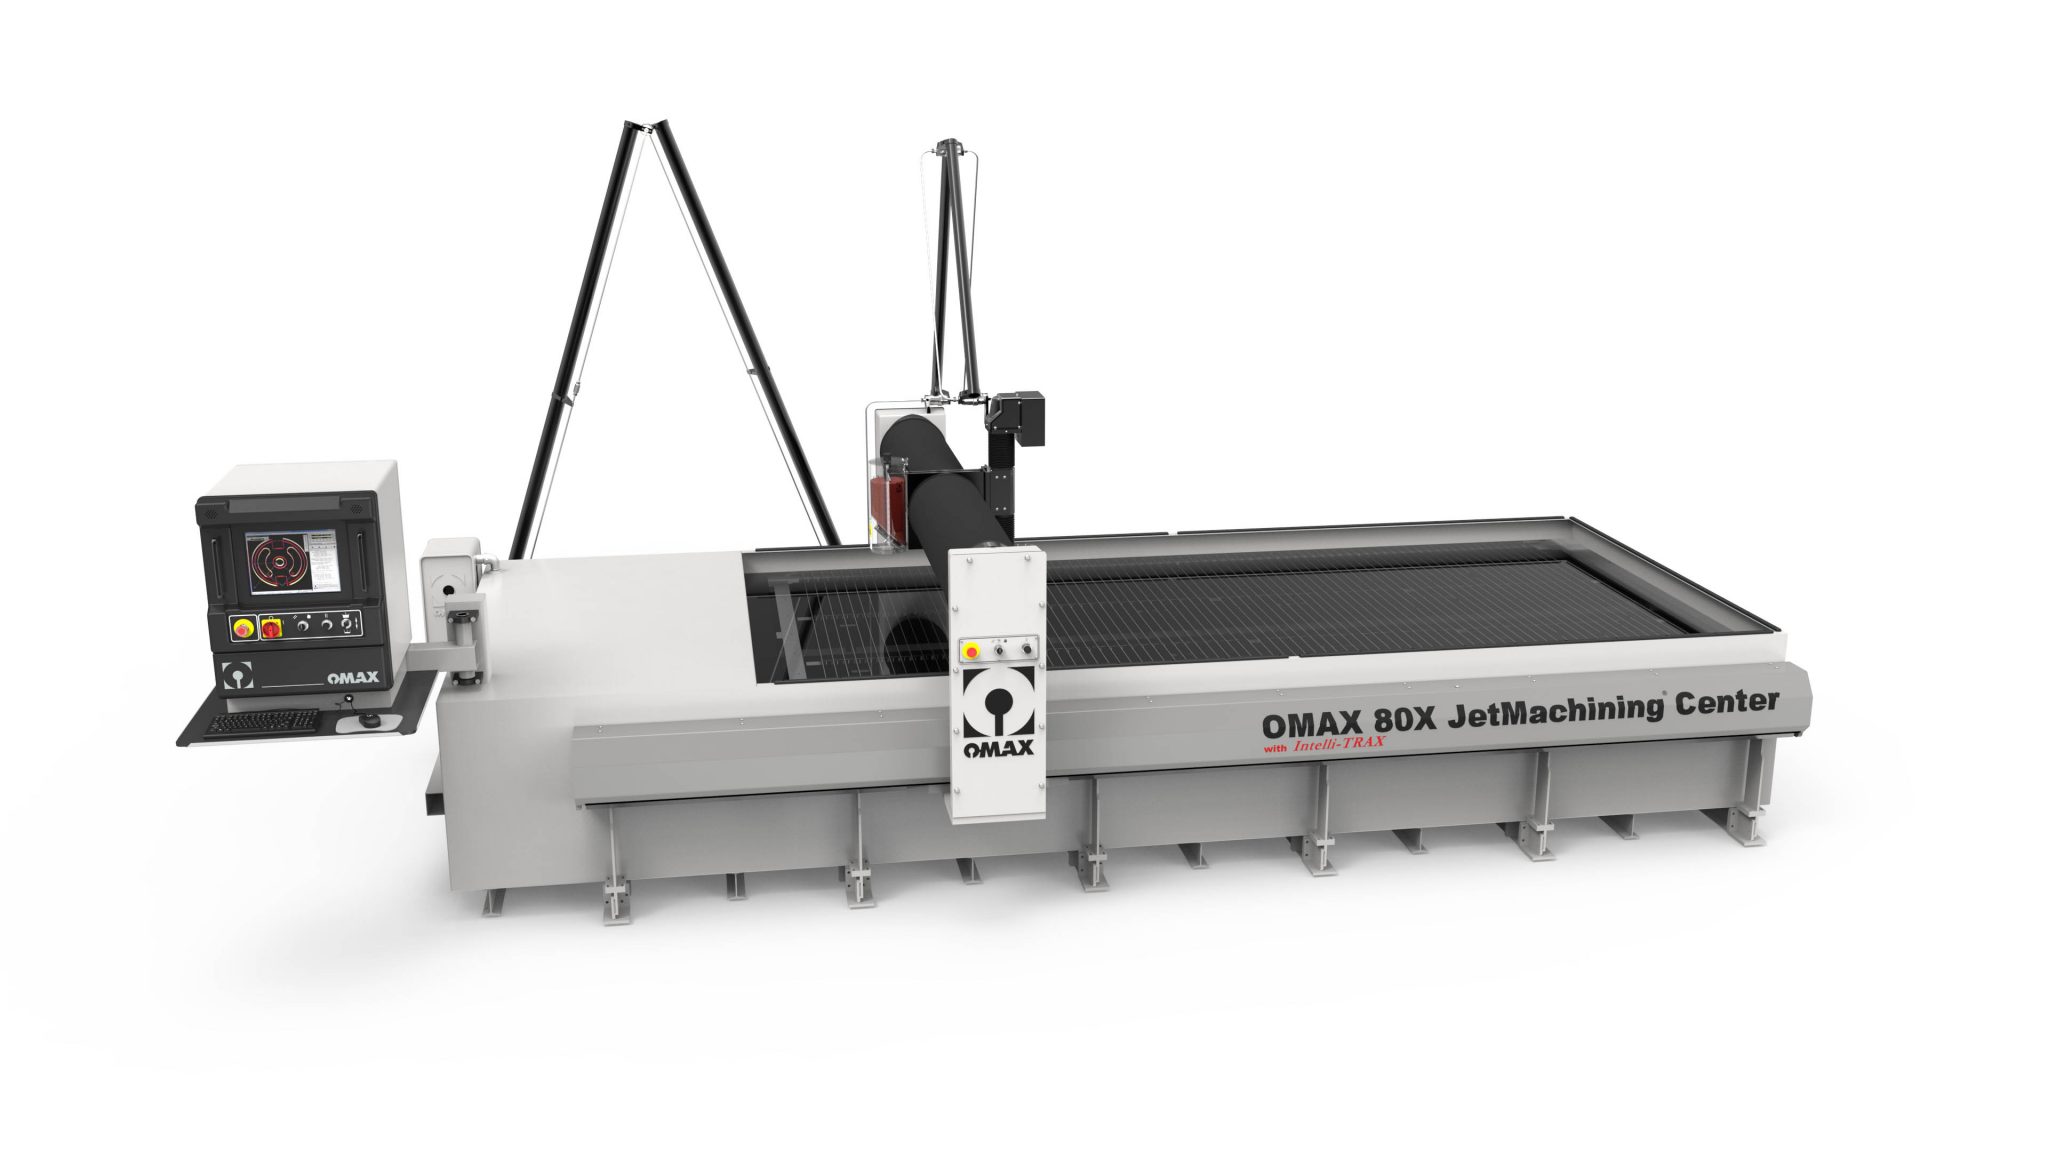 OMAX® To Showcase Full Range of Waterjets at FABTECH 2019